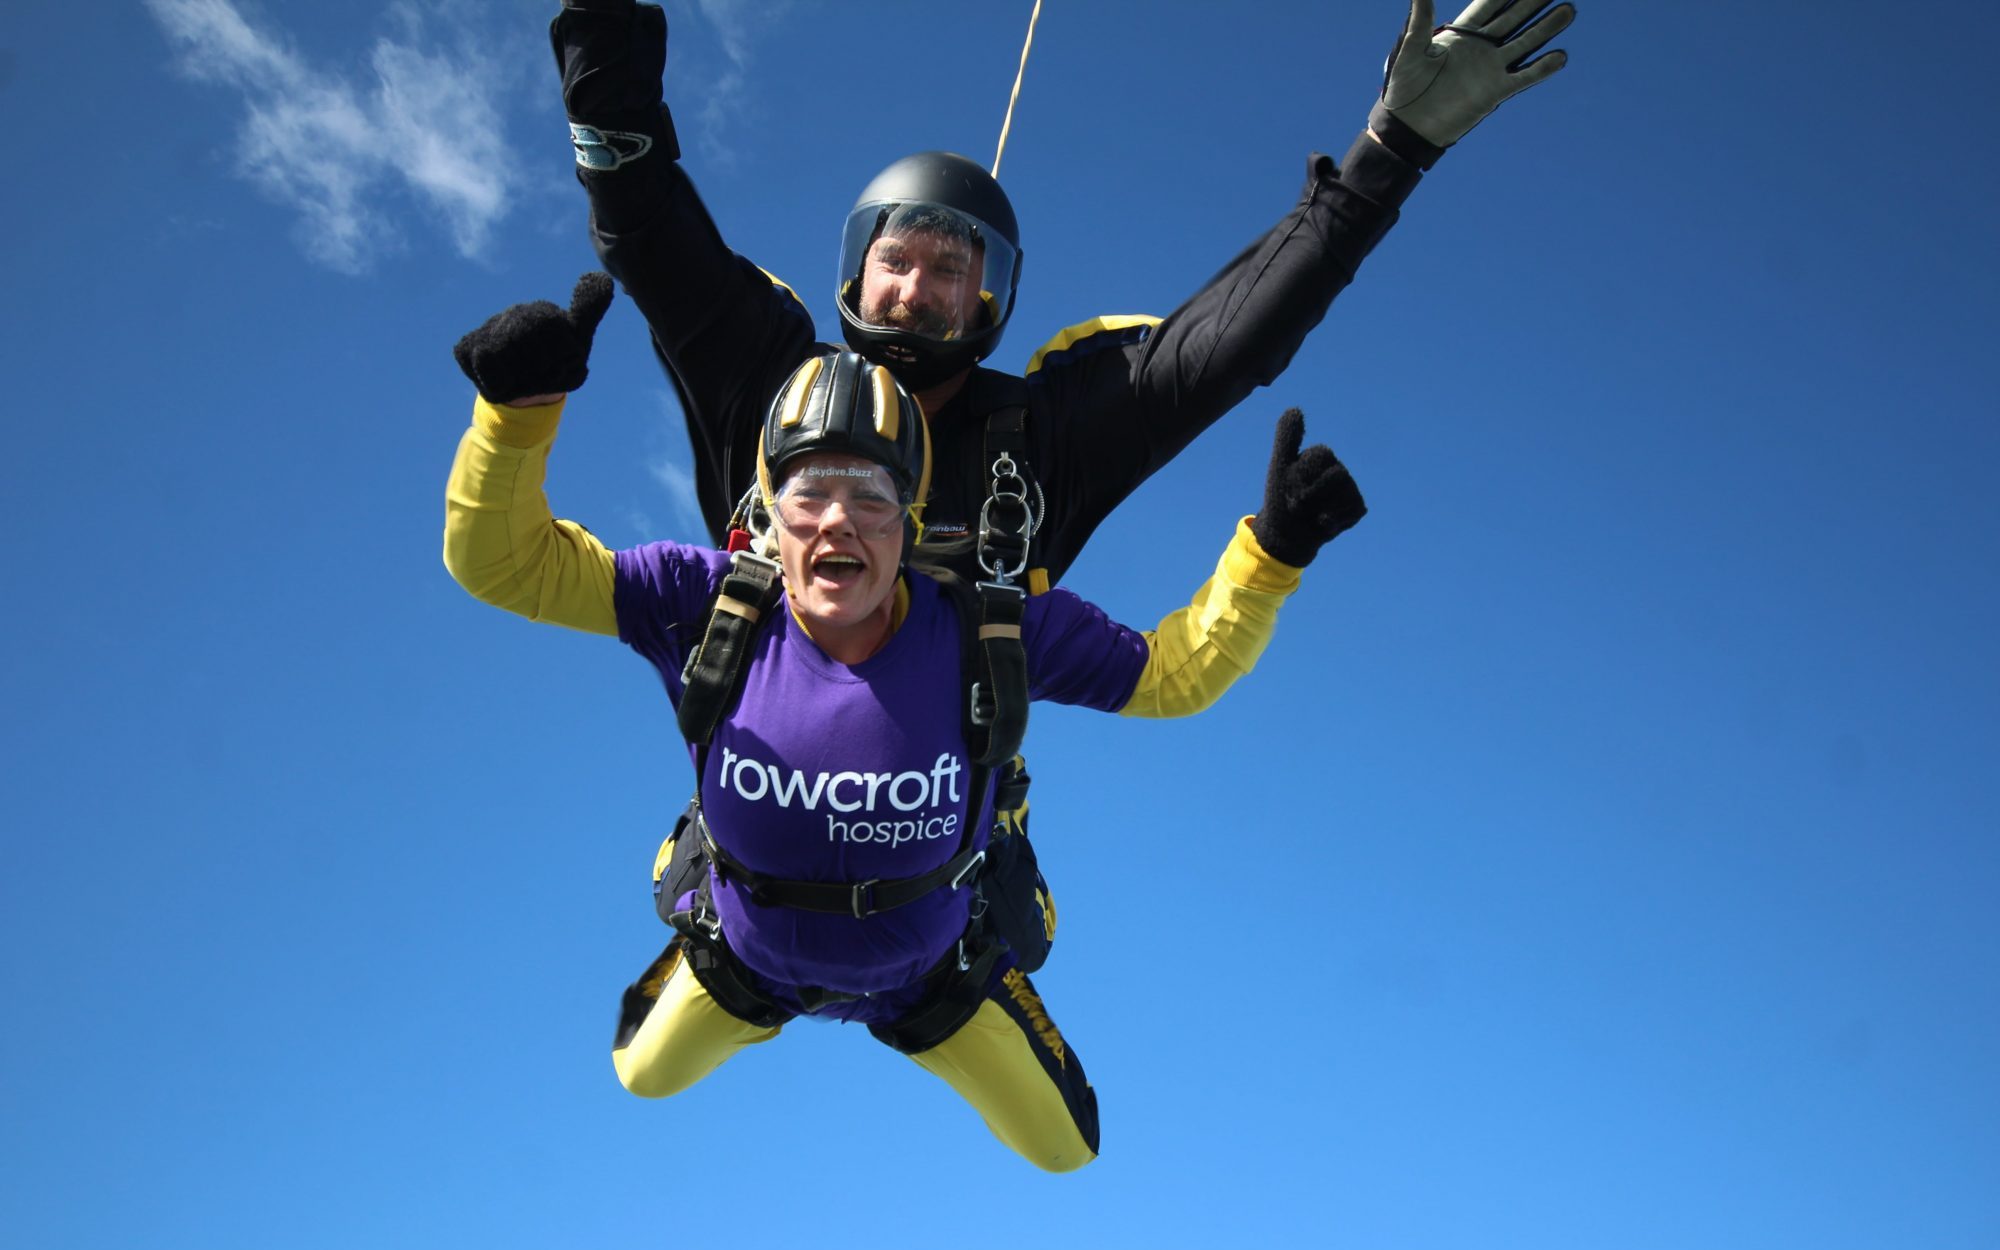 Fundraiser for Rowcroft poses with a thumbs up mid skydive.